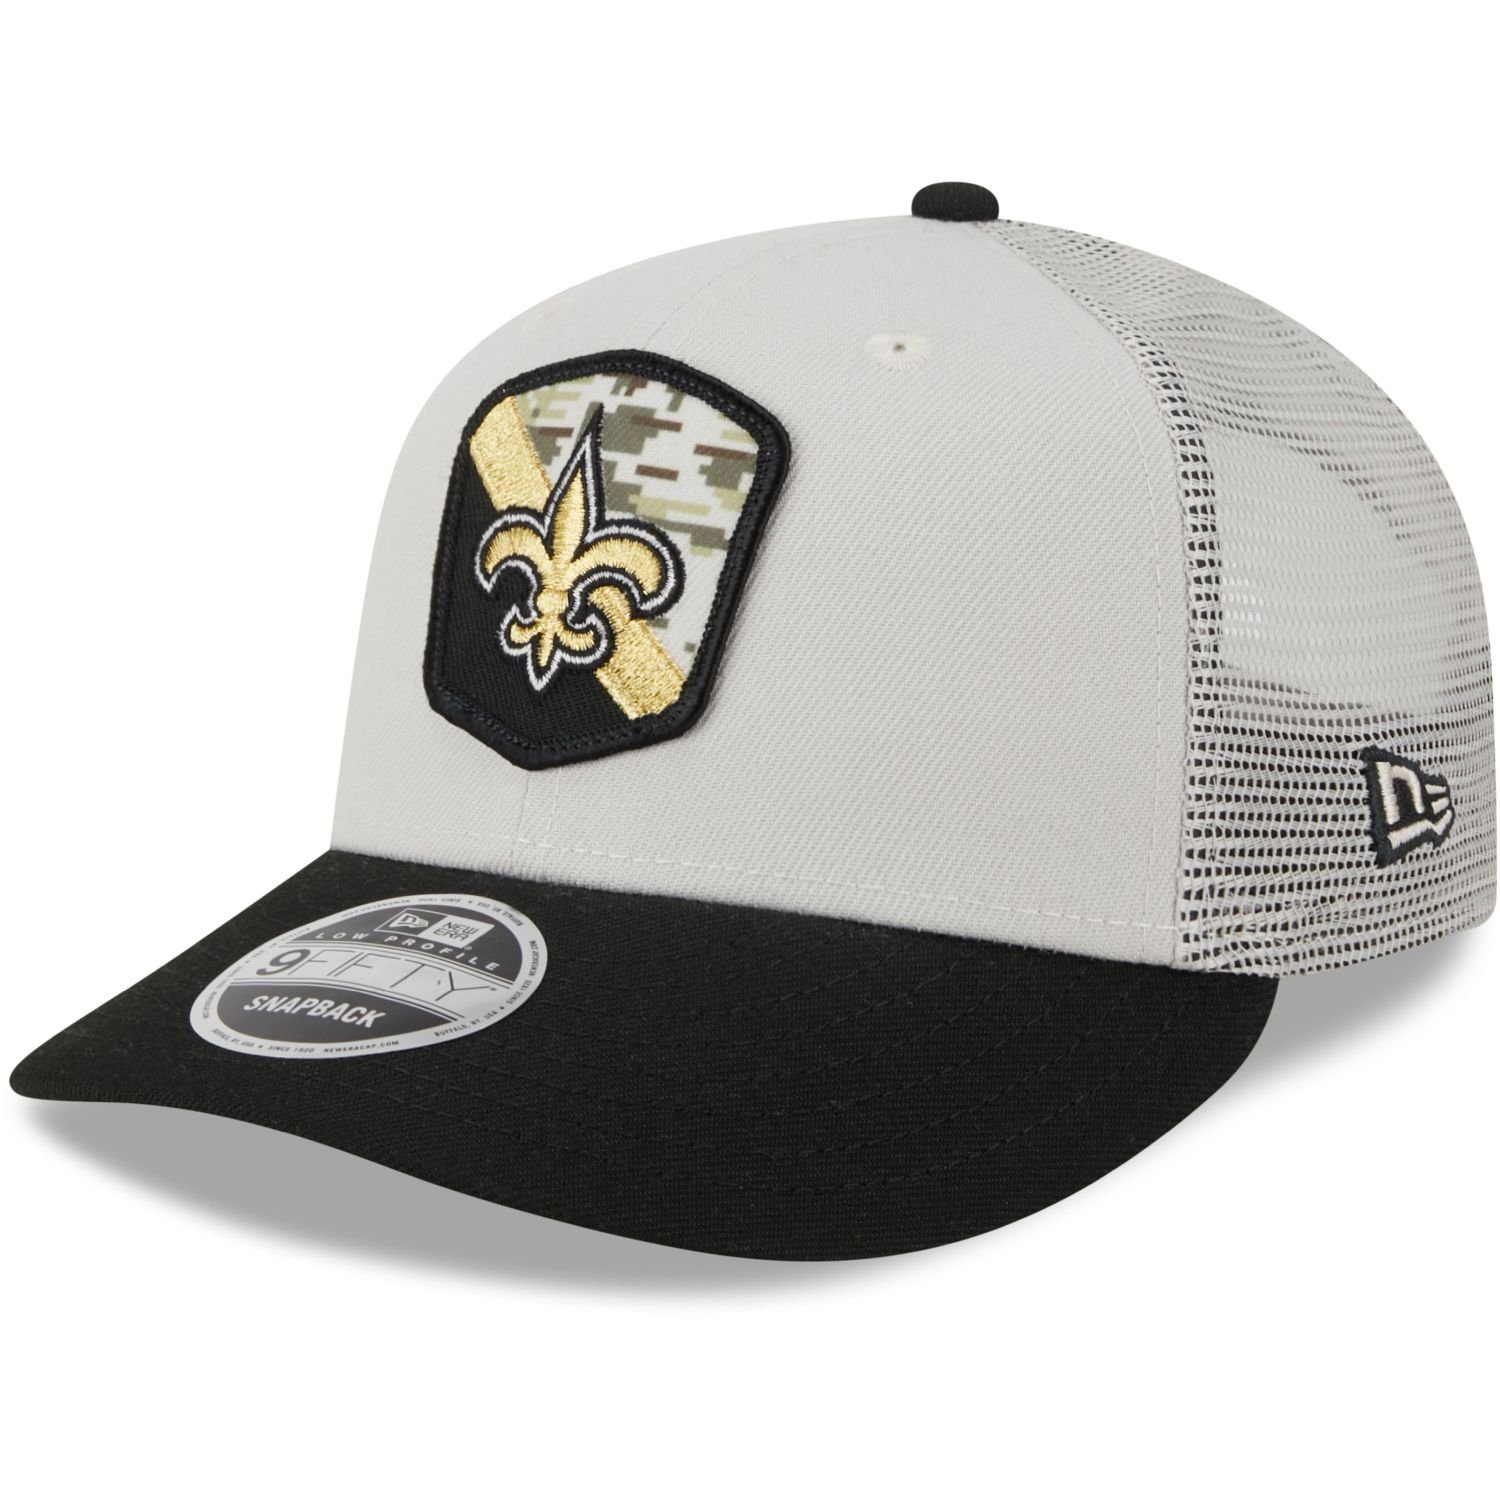 New Era Snapback Cap 9Fifty Low NFL Orleans Profile Salute Saints New Snap to Service